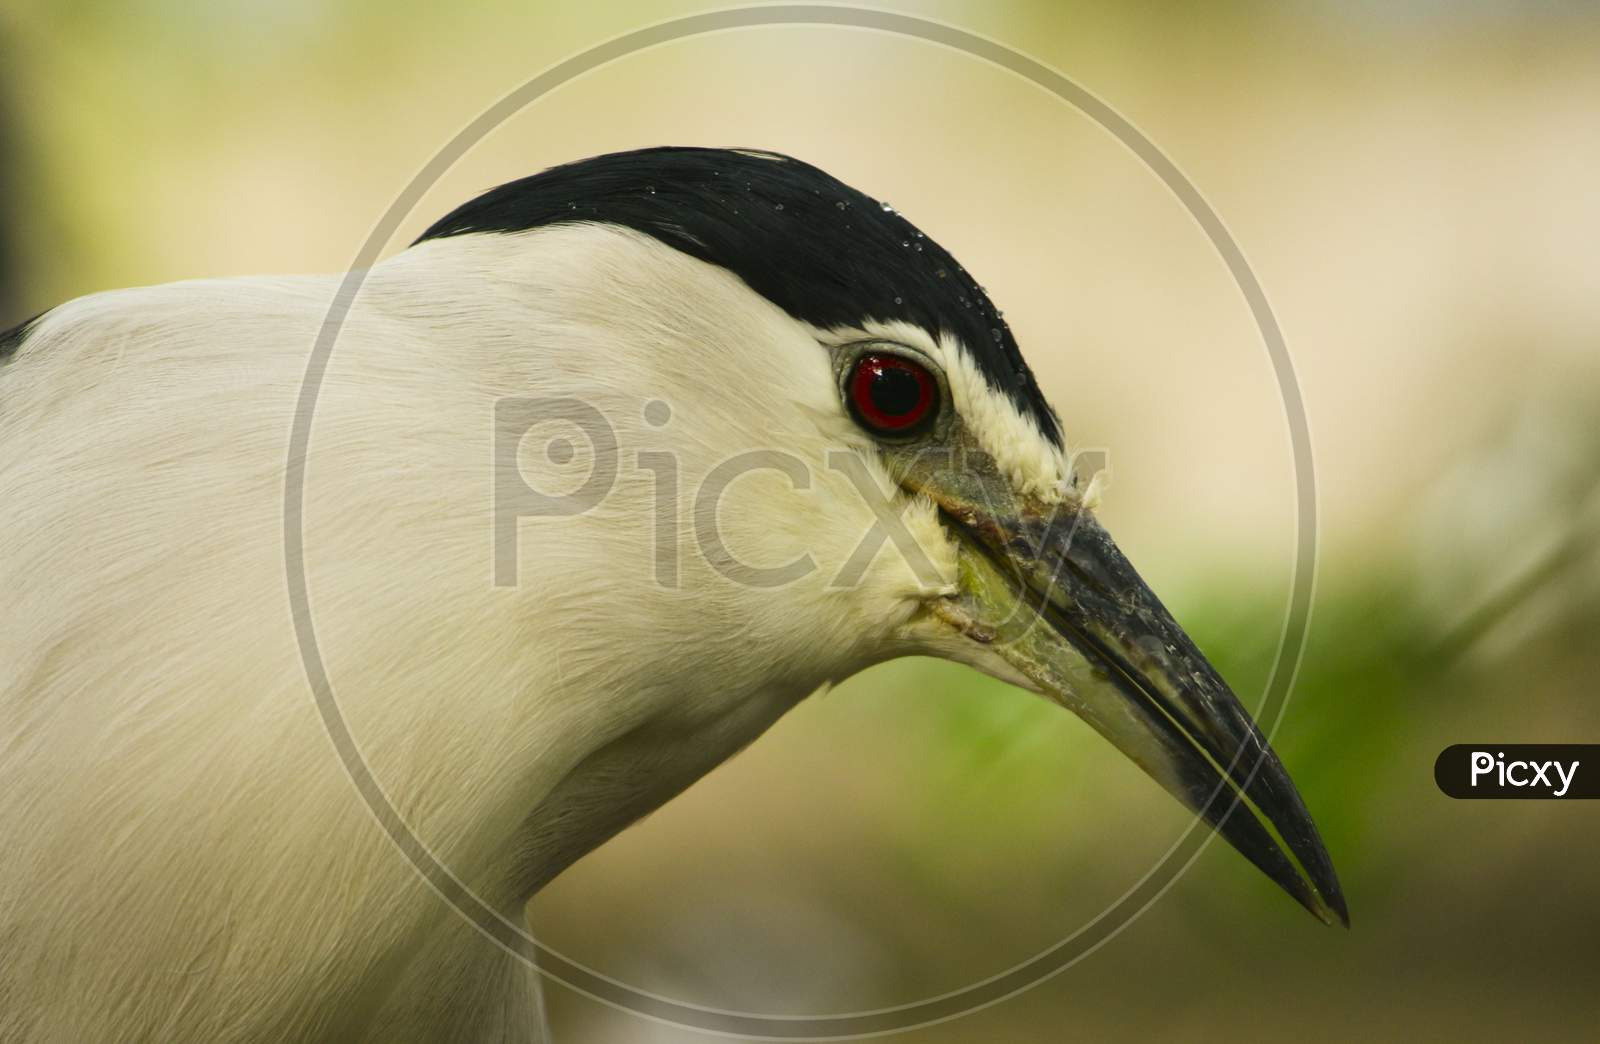 Striated Heron Or Green Backed Heron Close Up. Portrait Of Pond Heron Bird On Hunting Filed.